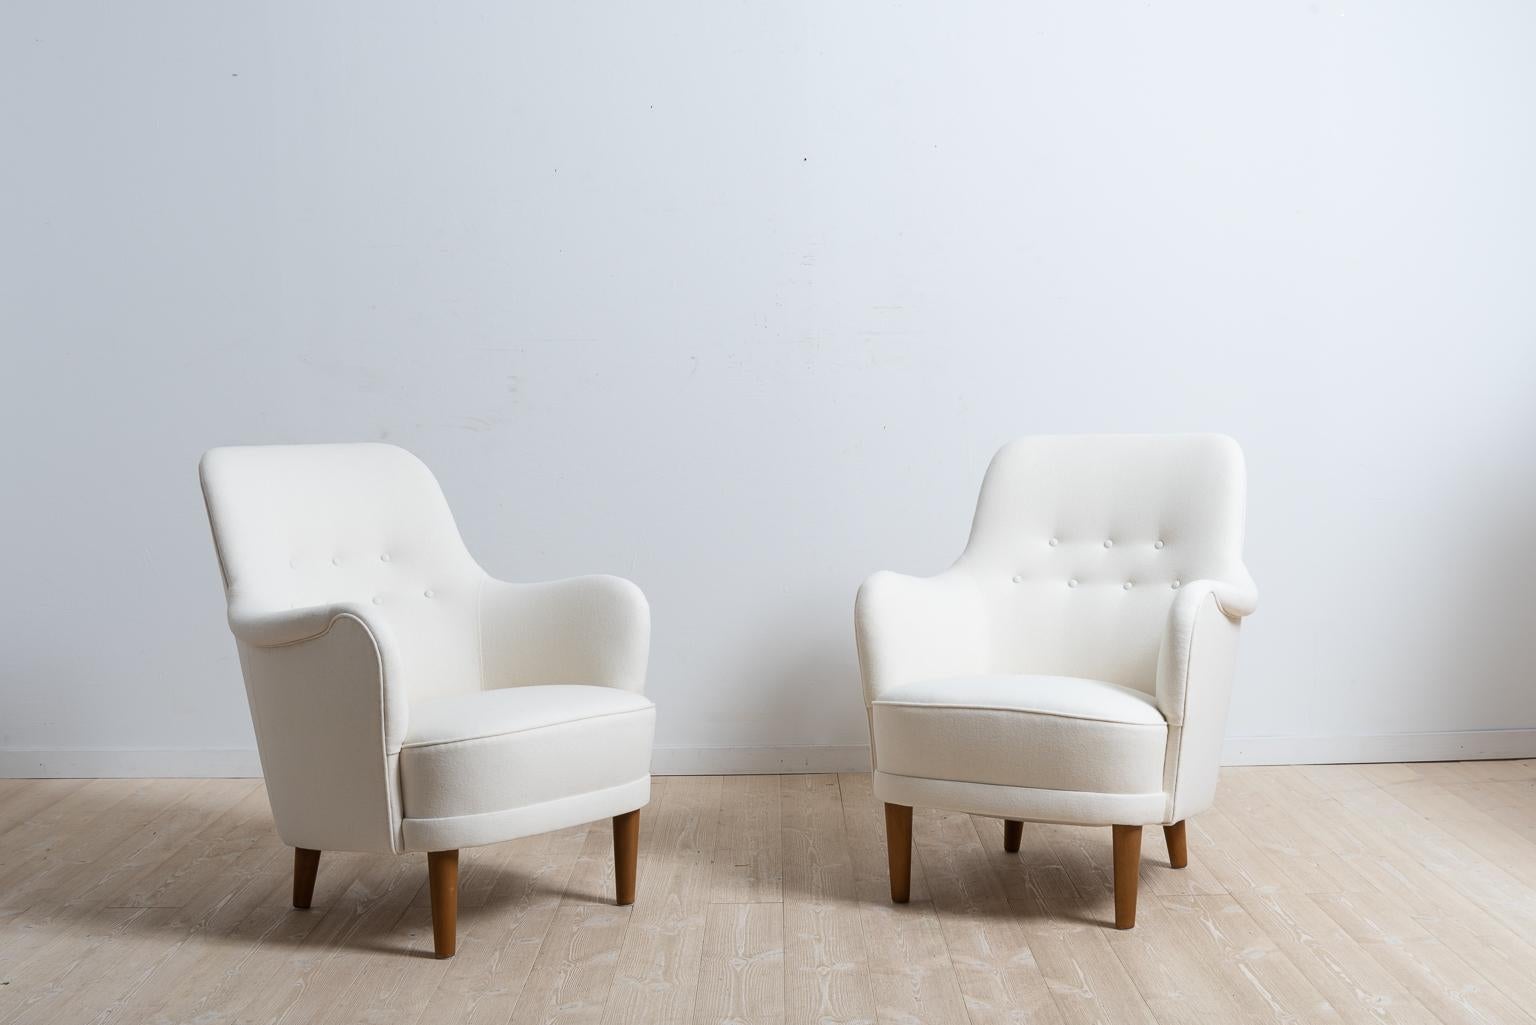 Set of two armchairs 'Samsas' designed by Swedish designer Carl Malmsten. The chairs are manufactured by AB O.H Sjögren in Tranås, Sweden. The chairs were manufactured during the latter part of the 1960s. The chairs are newly renovated and